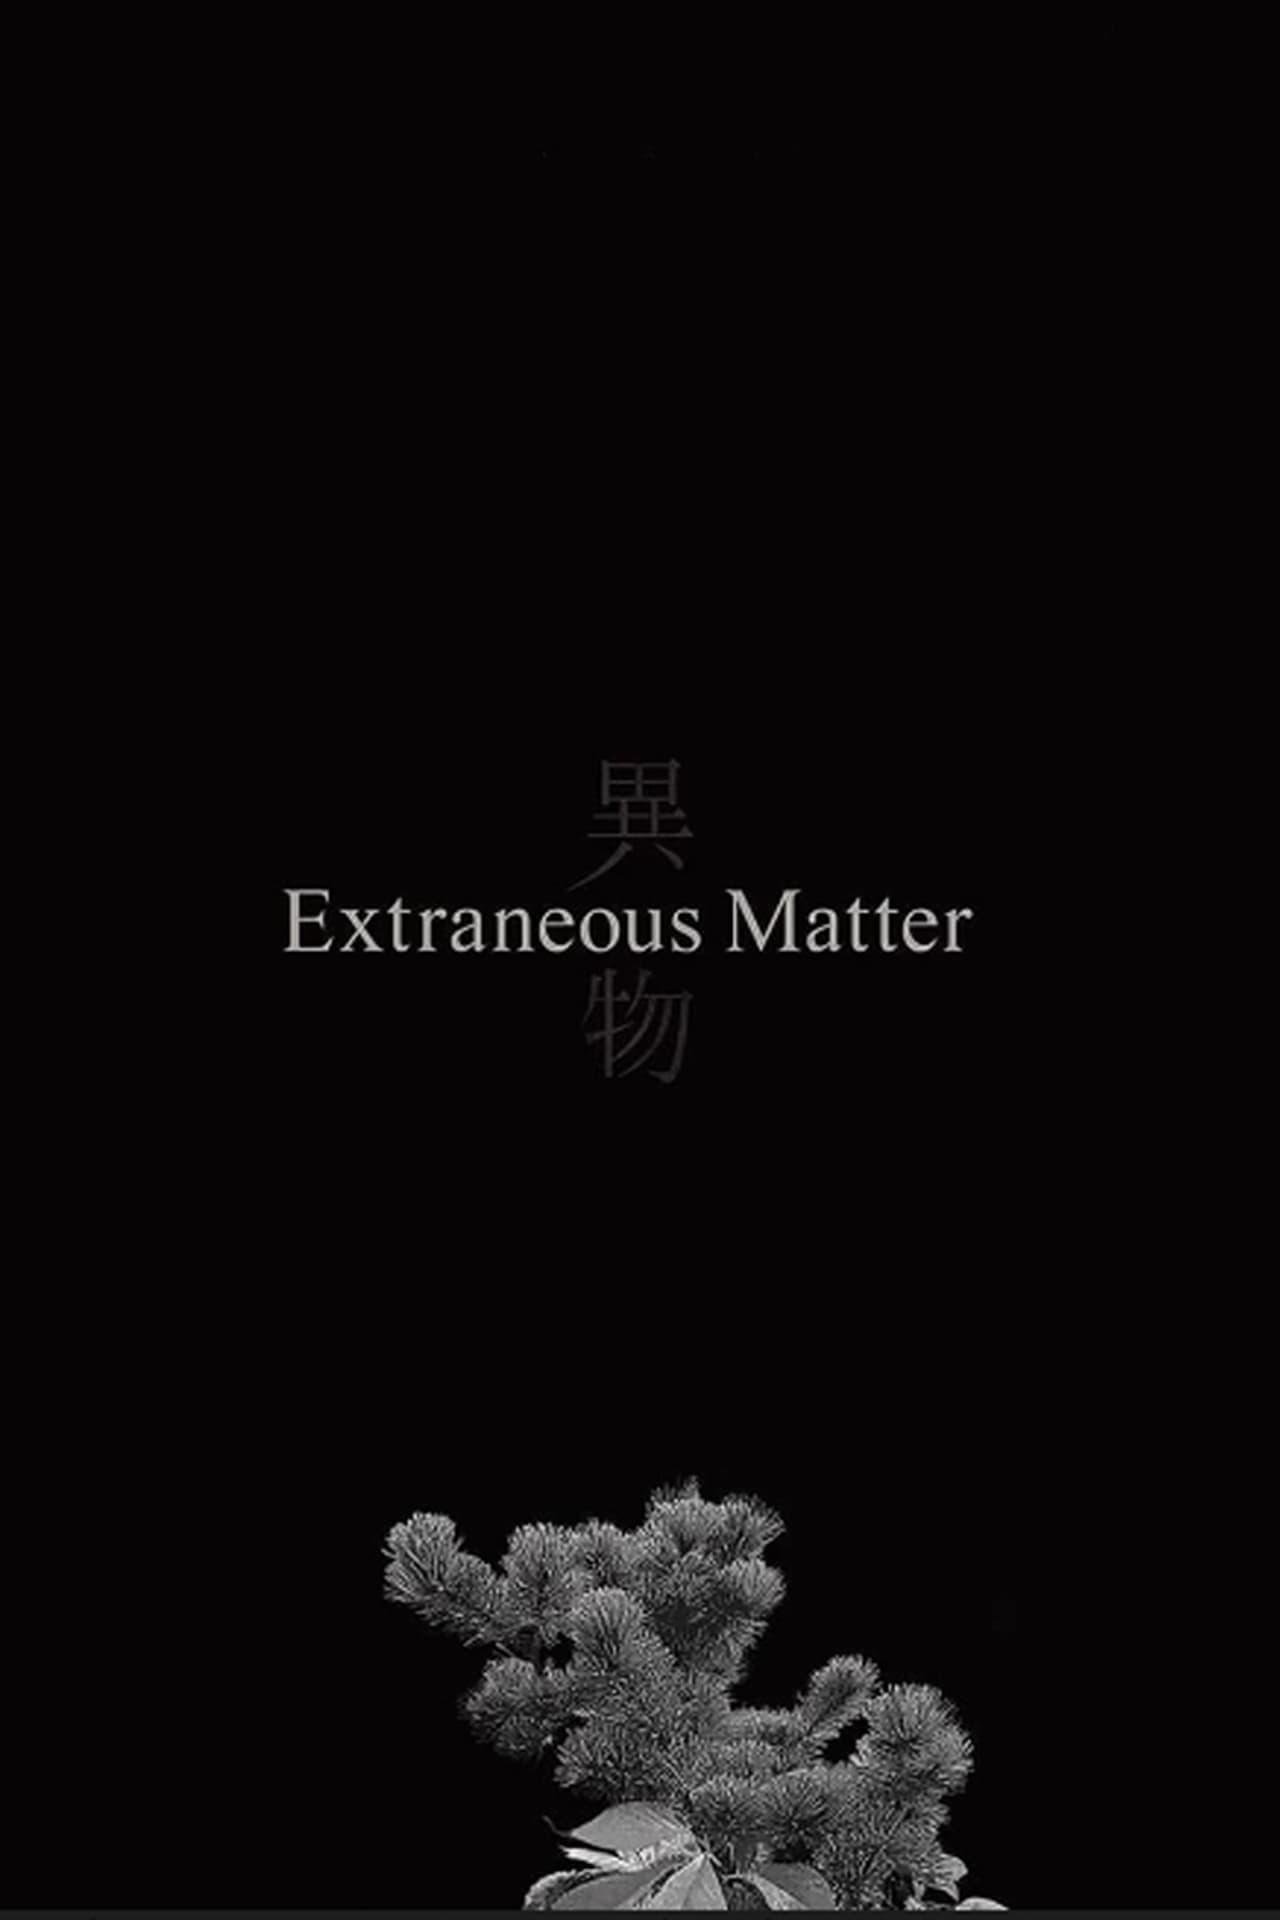 Extraneous Matter Complete Edition poster